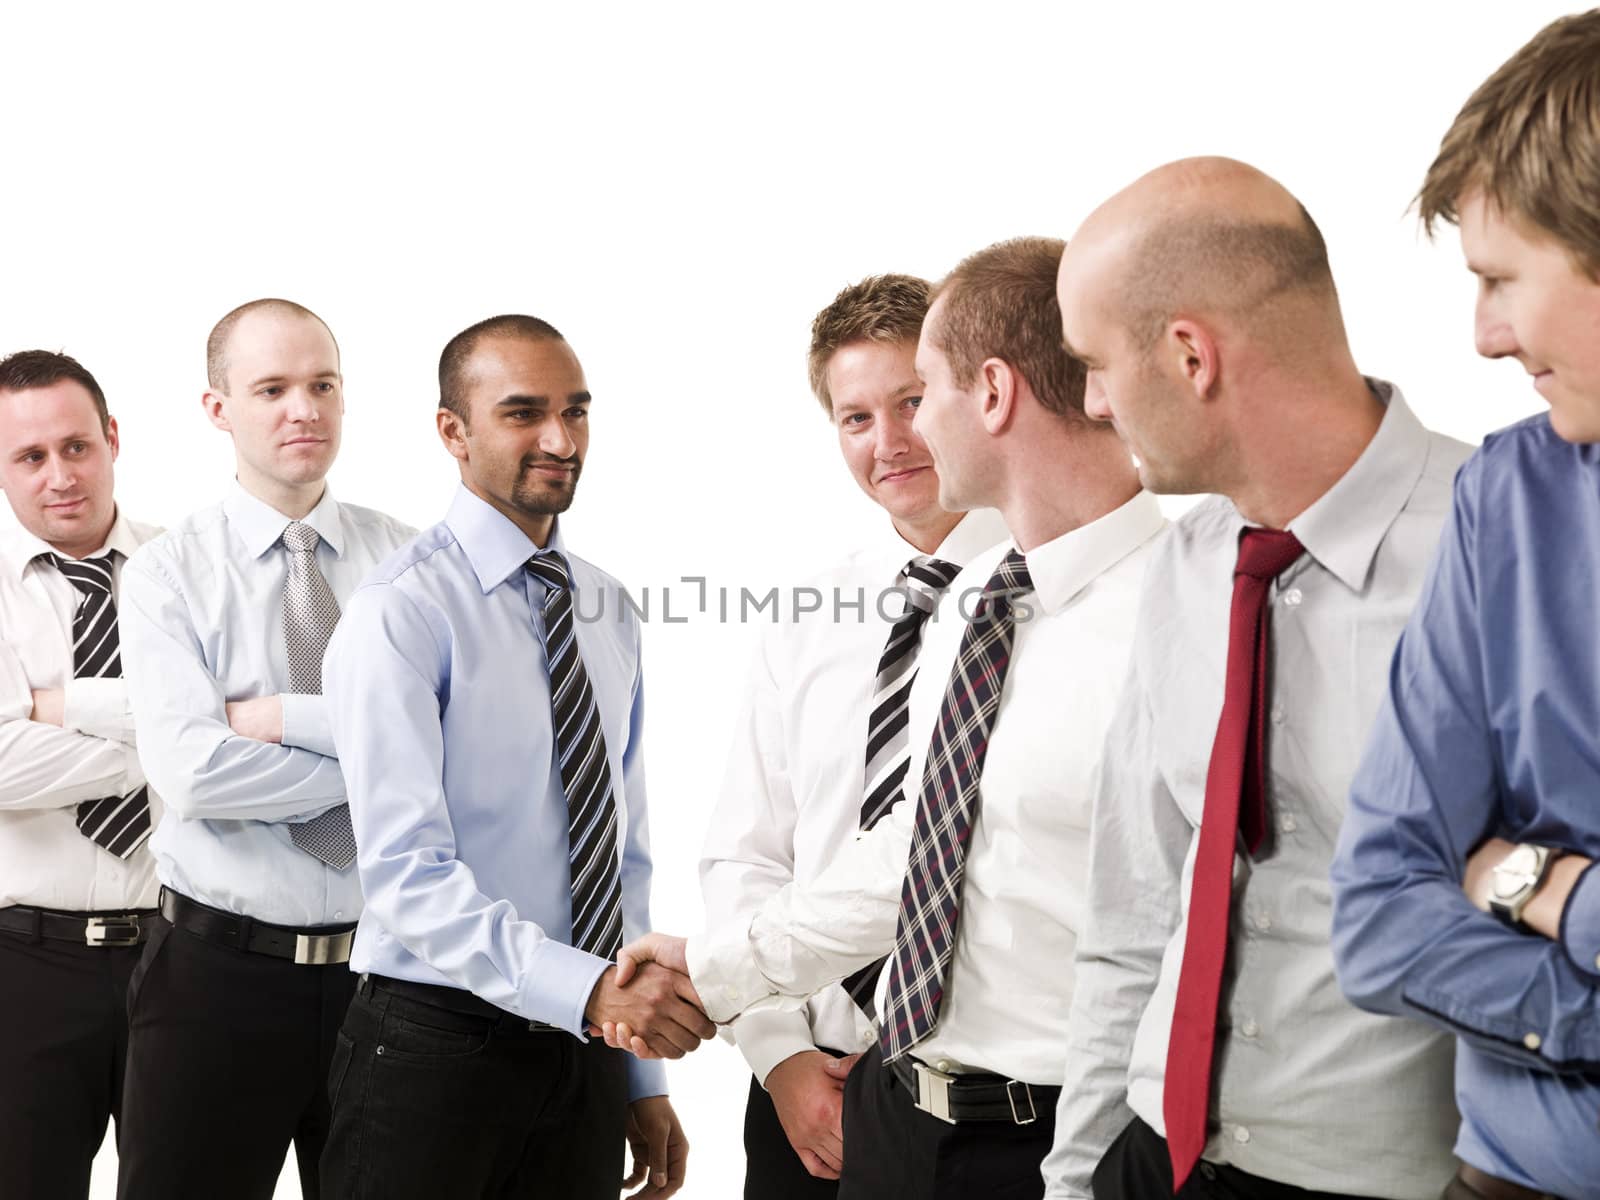 Businessmen shaking hands standing in a group of people